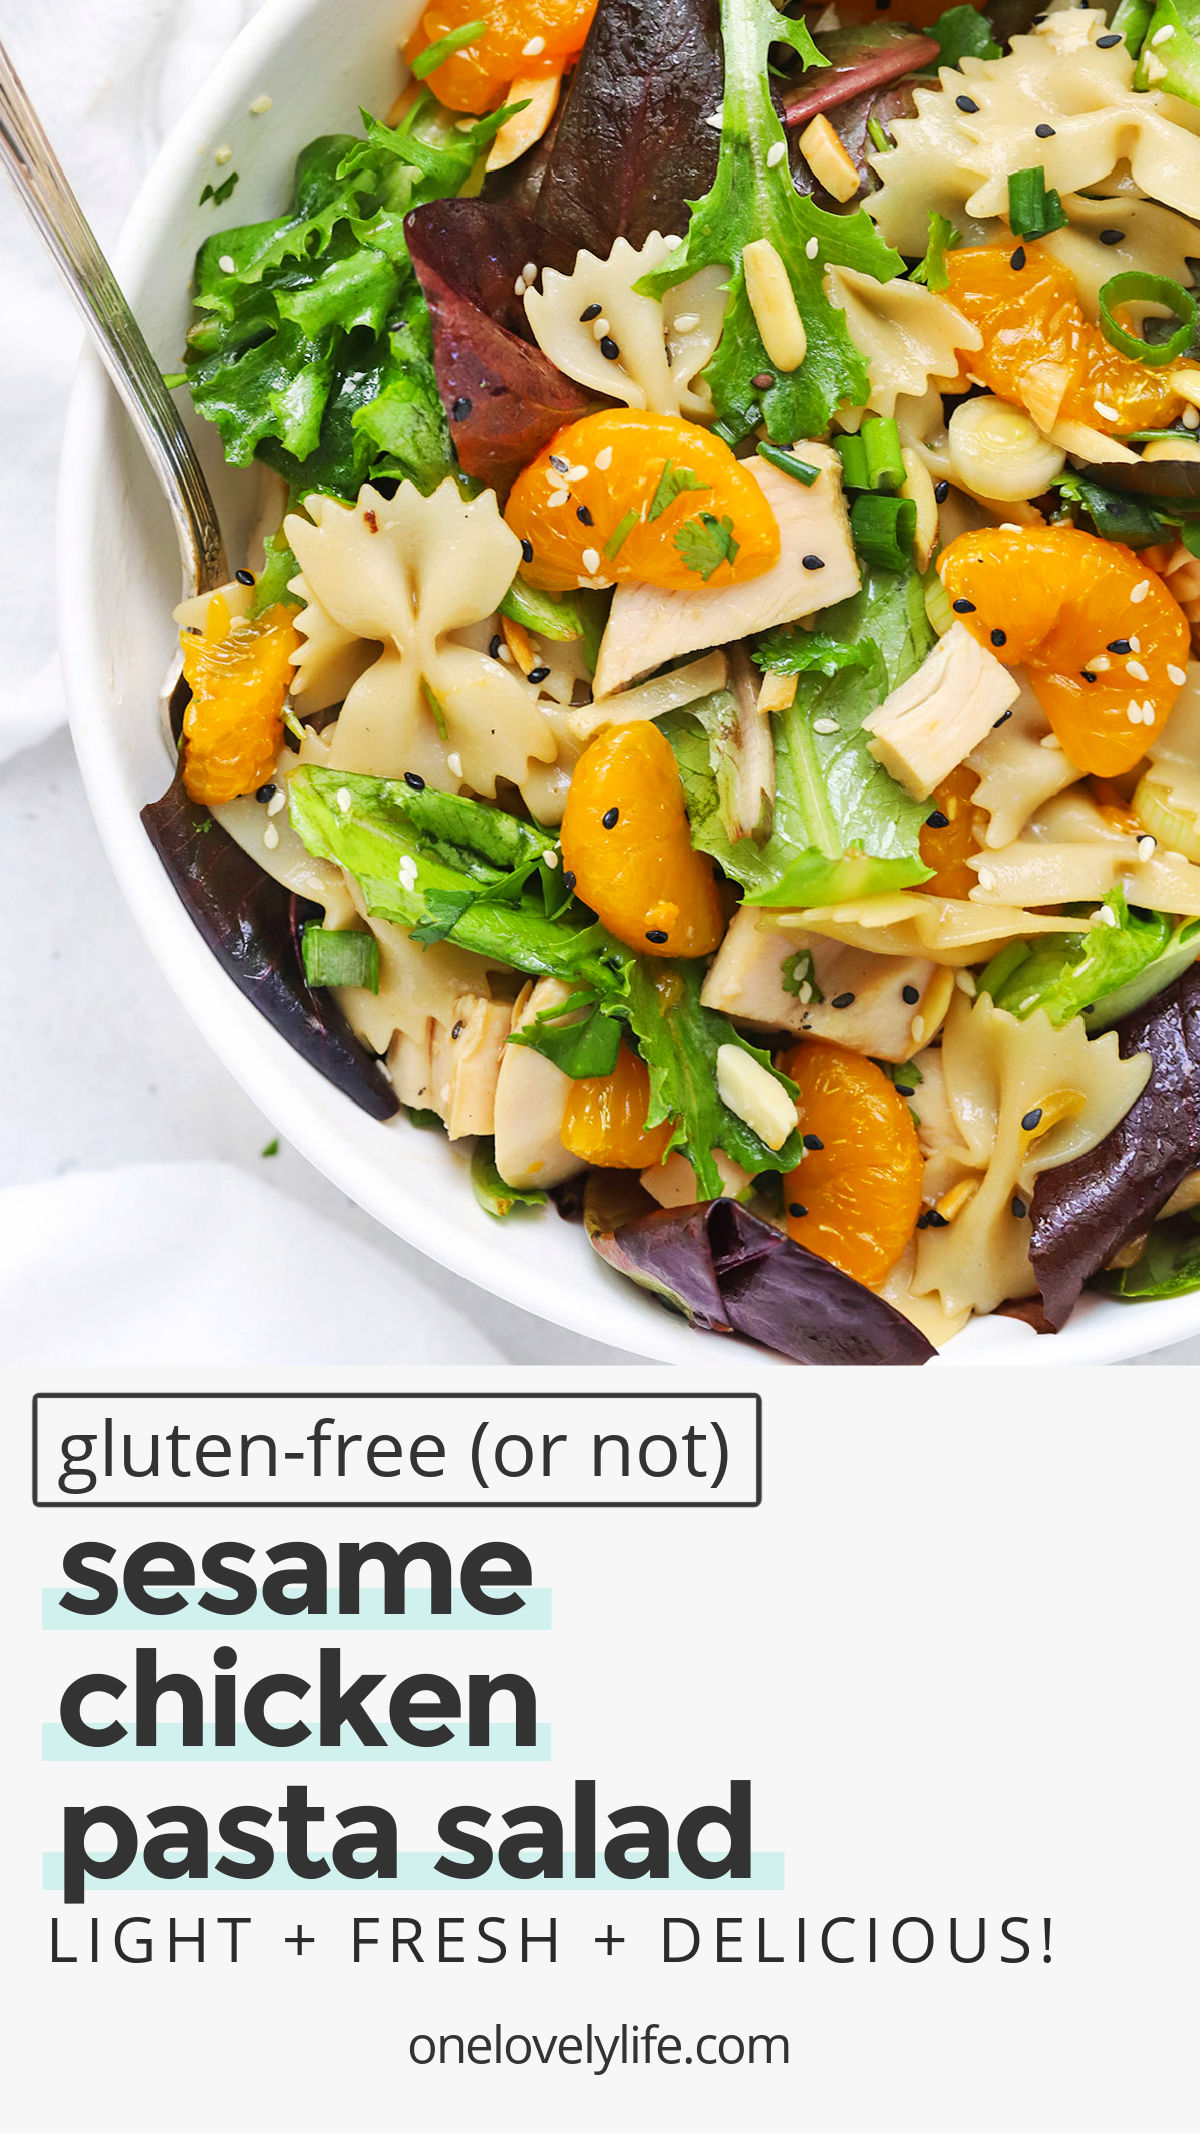 Sesame Chicken Pasta Salad - Sesame pasta salad with mandarin oranges & a tangy Asian-inspired dressing make this the perfect summer recipe! (Gluten-Free or Not) / gluten-free pasta salad recipe / chicken pasta salad recipe / summer salad // easy pasta salad / asian pasta salad / mandarin pasta salad / gluten-free BBQ side dish / gluten-free potluck recipe / dinner salad / gluten-free pasta // pasta salad no mayo / pasta salad without mayo / pasta salad with vinaigrette / pasta salad dressing